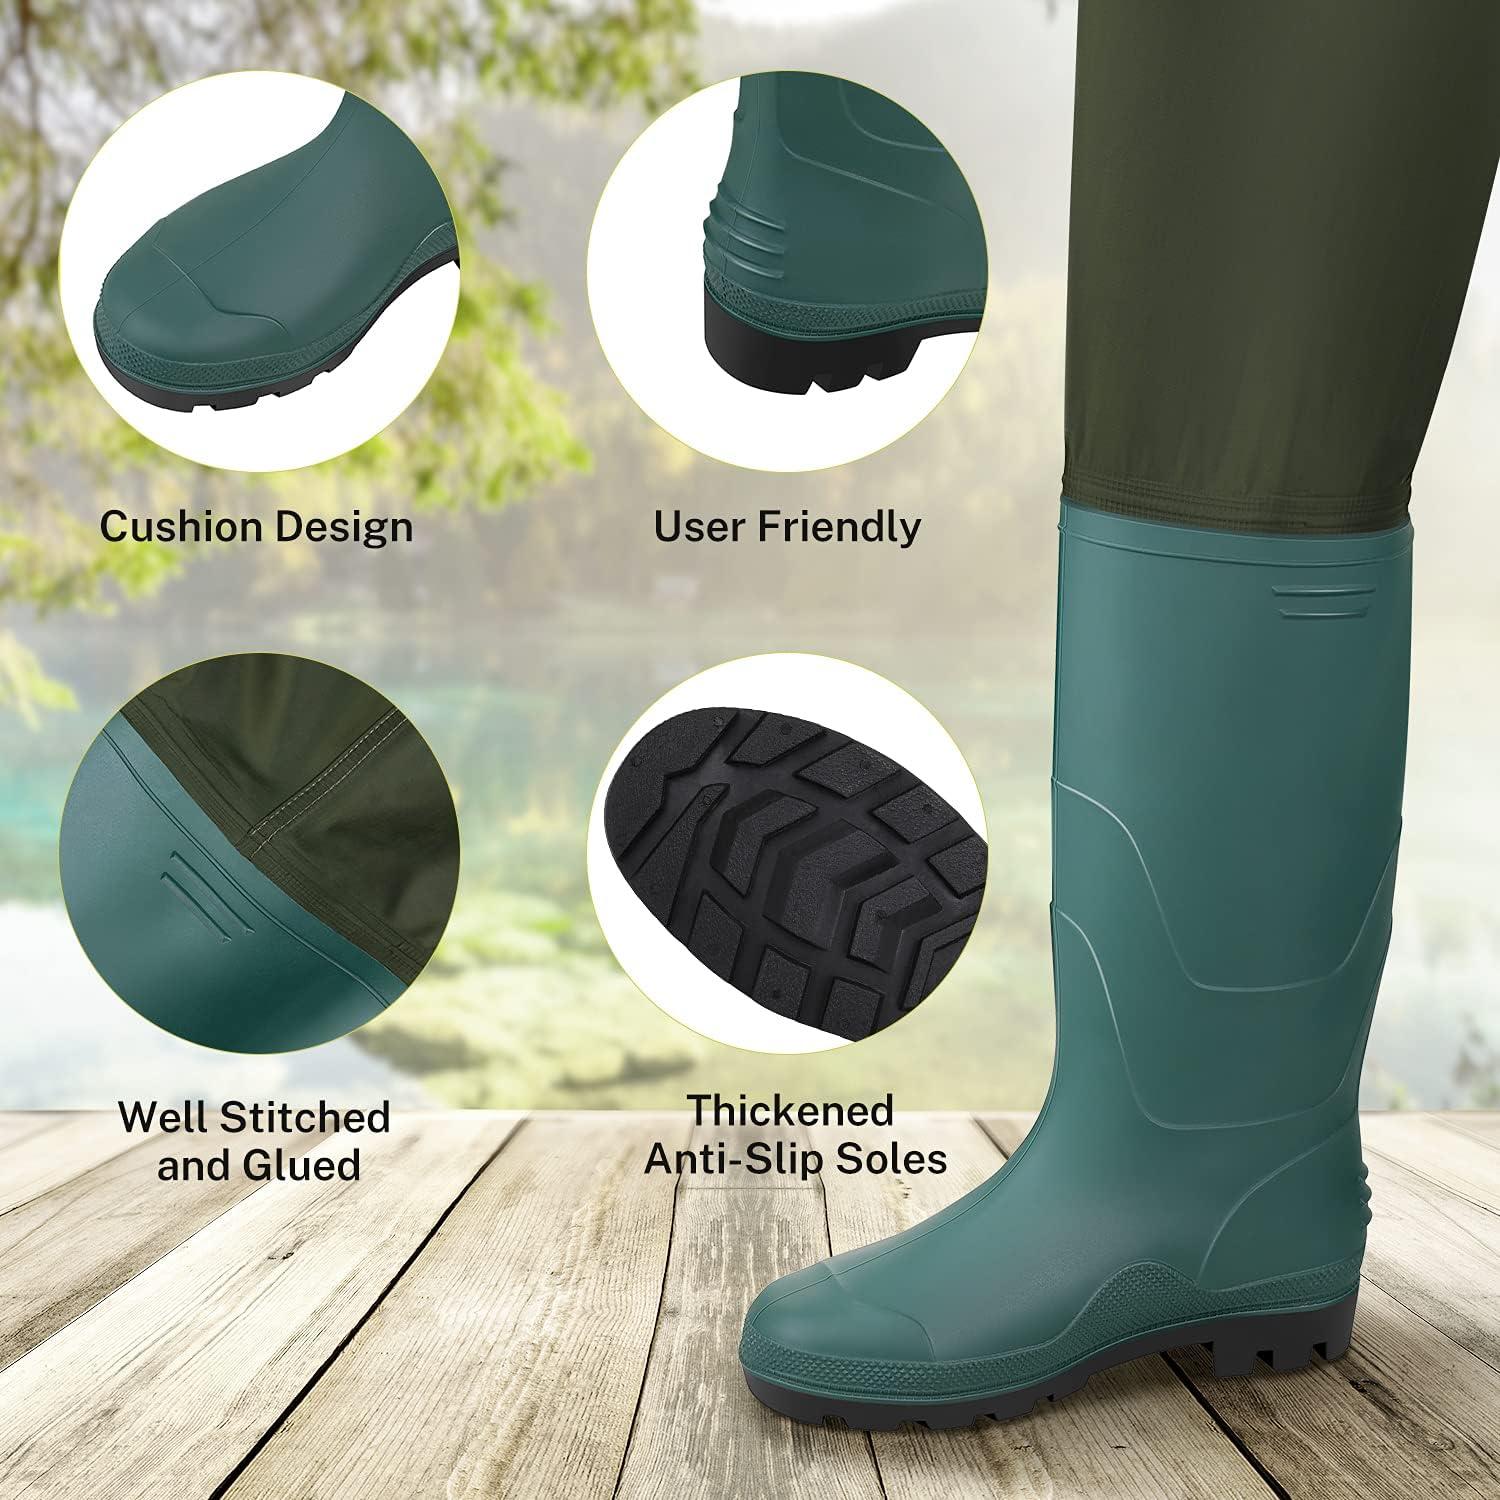 Gonex Children's Waterproof Nylon Youth Waders with Boots Fishing & Hunting  Waders for Toddlers & Children, Boys & Girls, Army Green : :  Sports & Outdoors